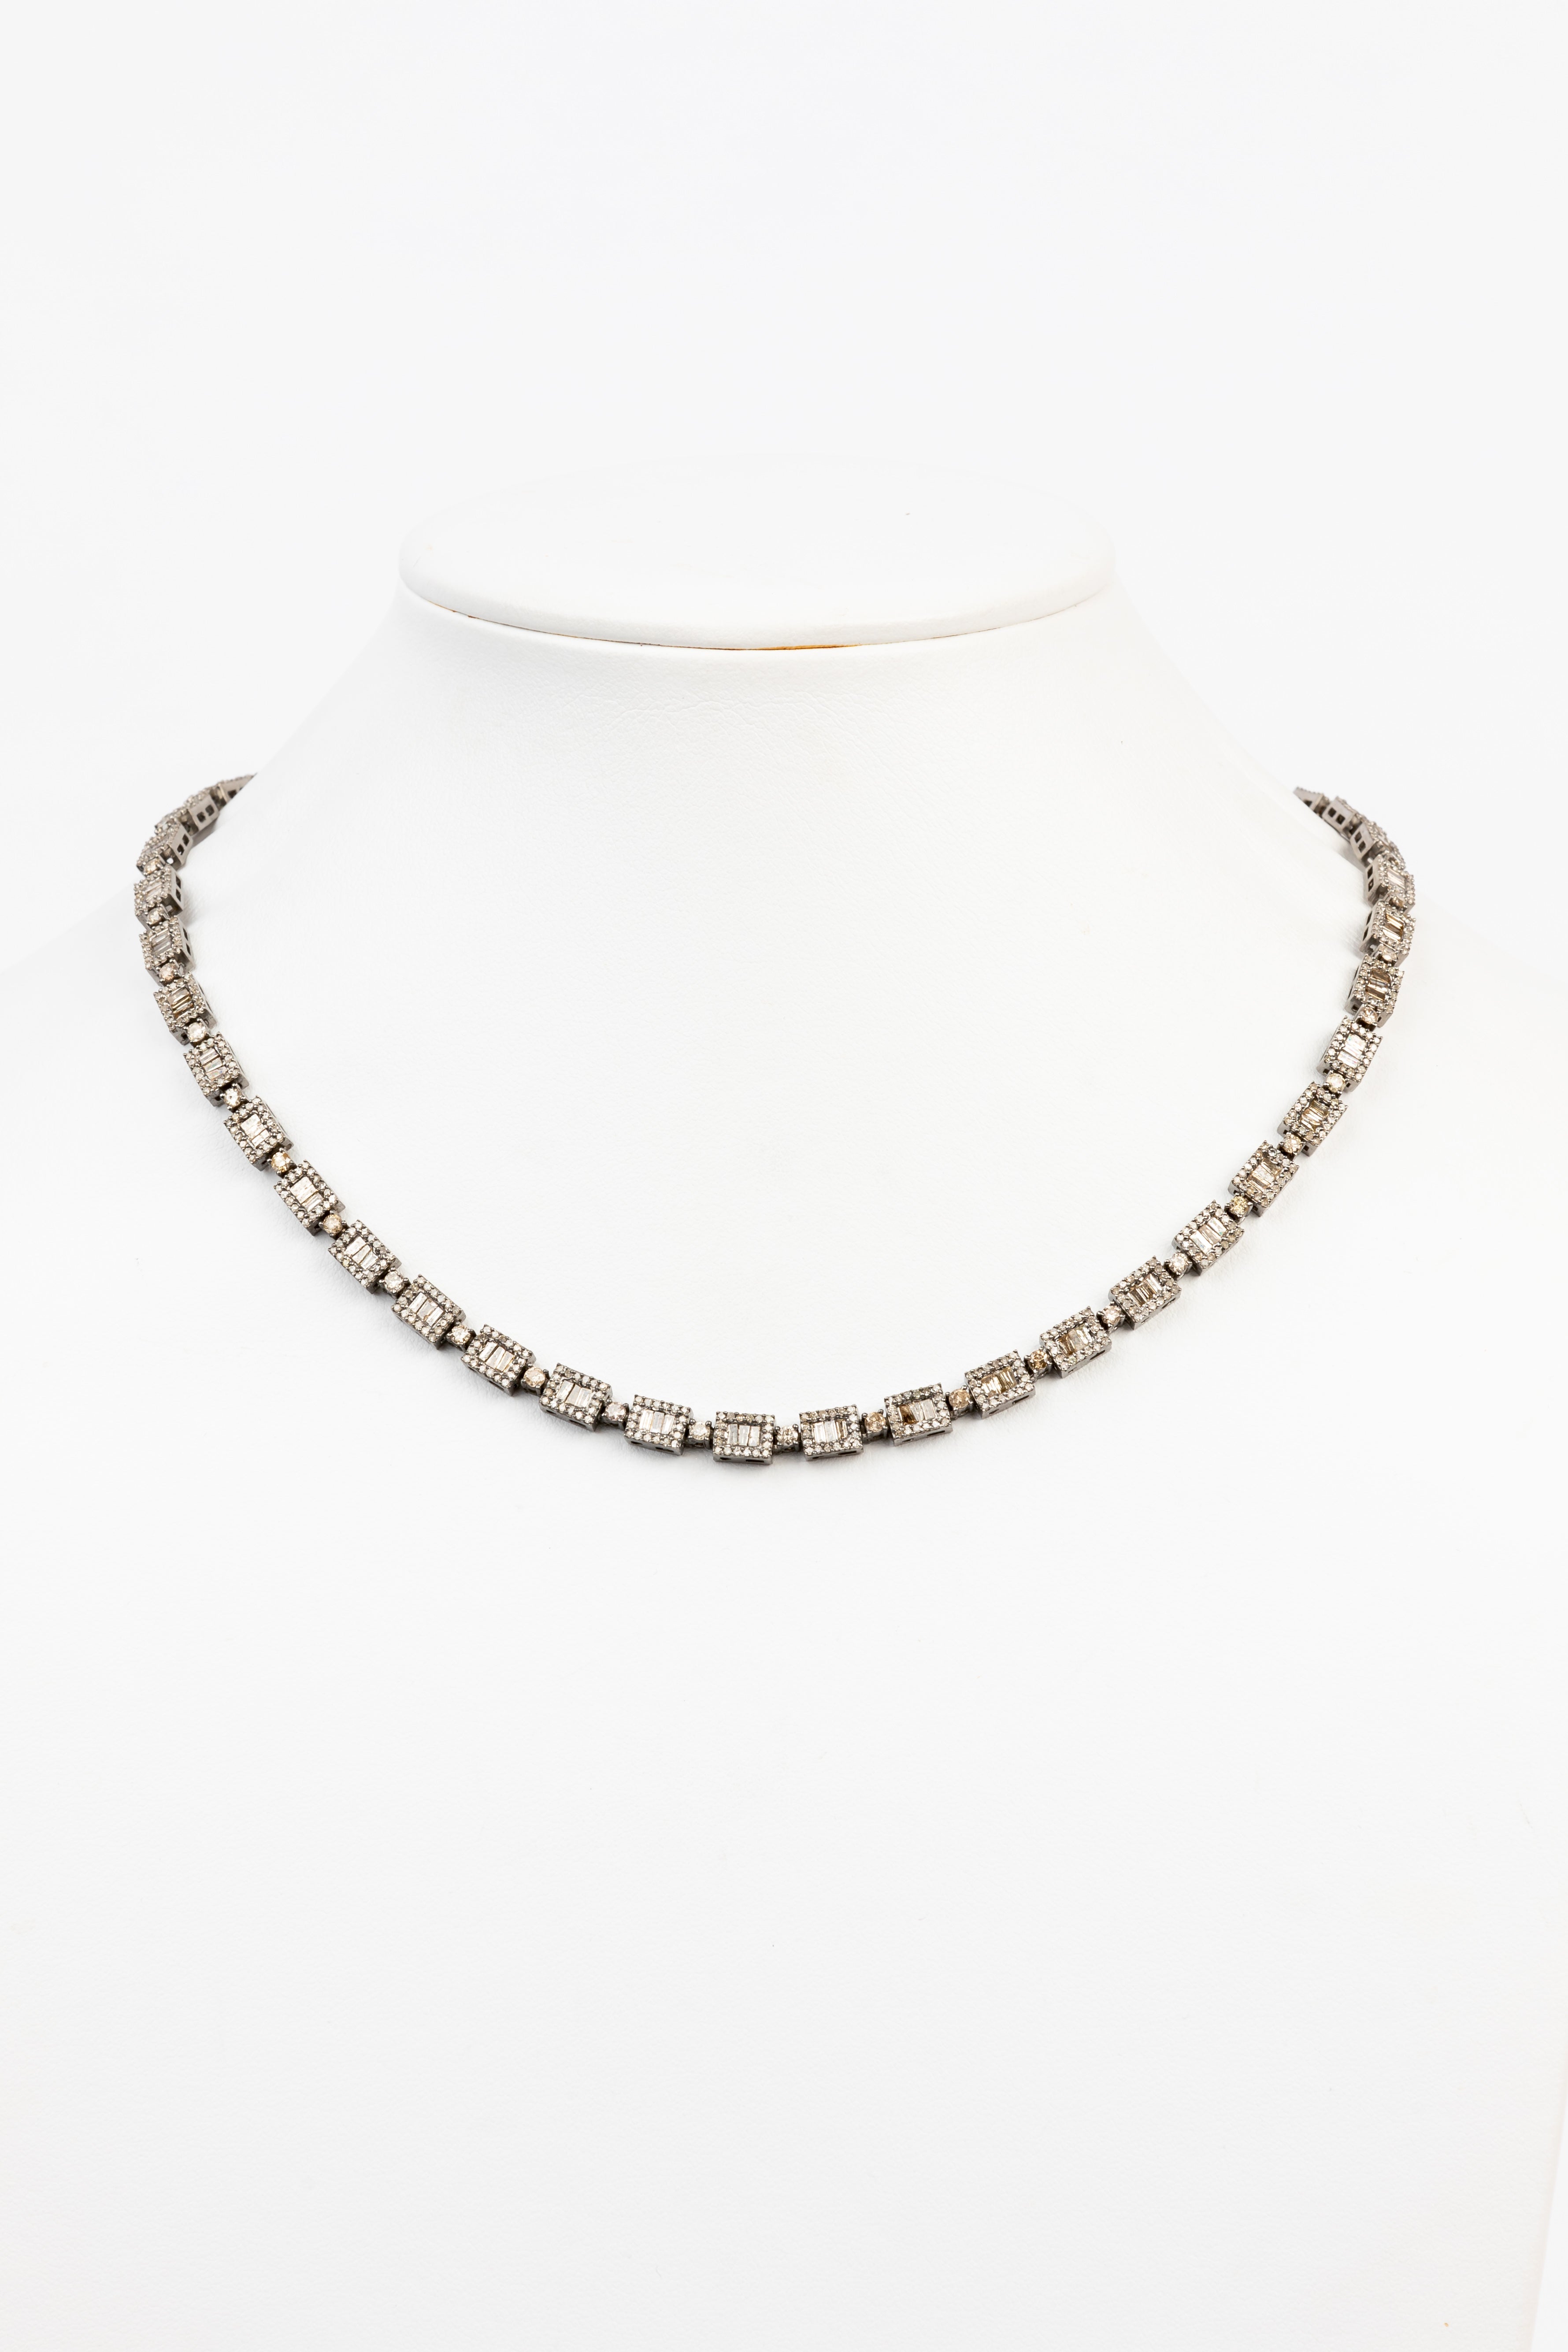 Pave Diamond and Baguette Necklace